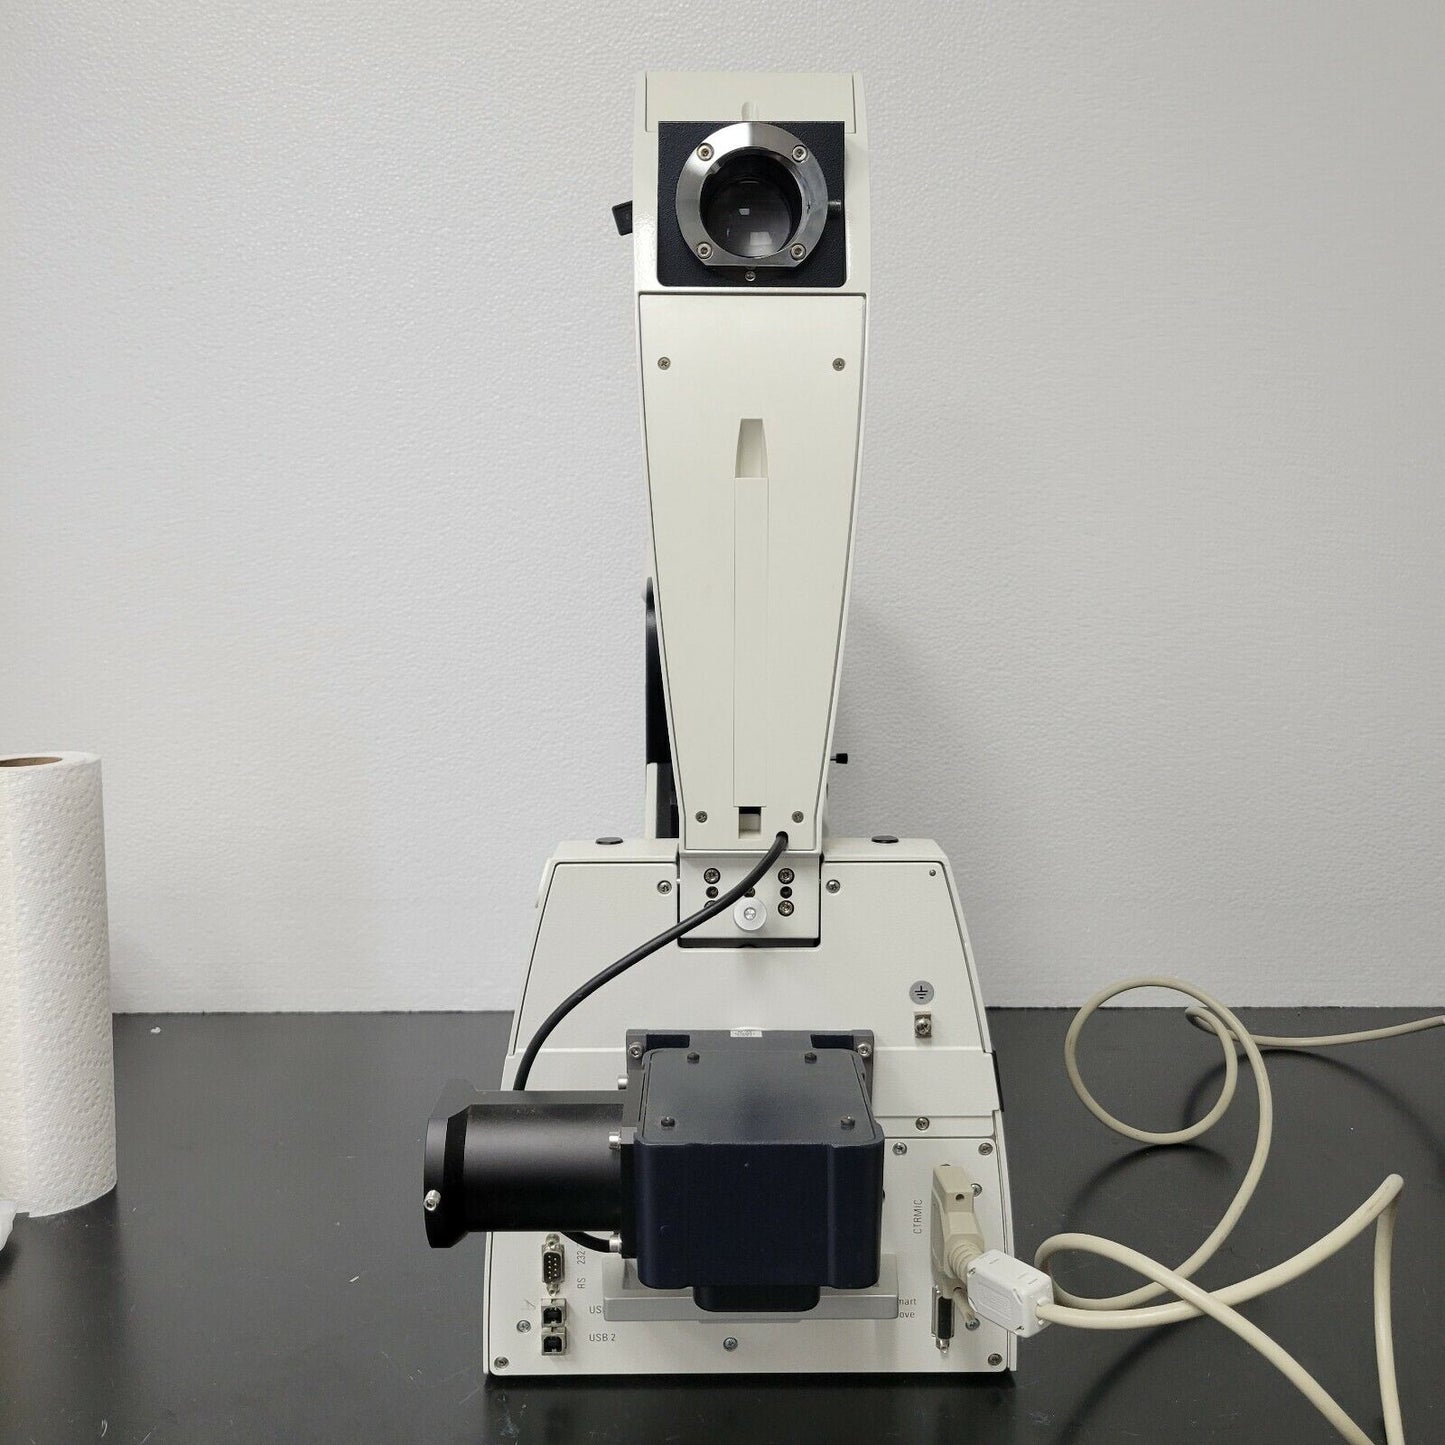 Leica Microscope Motorized DMI4000B with CTR4000 for Parts - microscopemarketplace